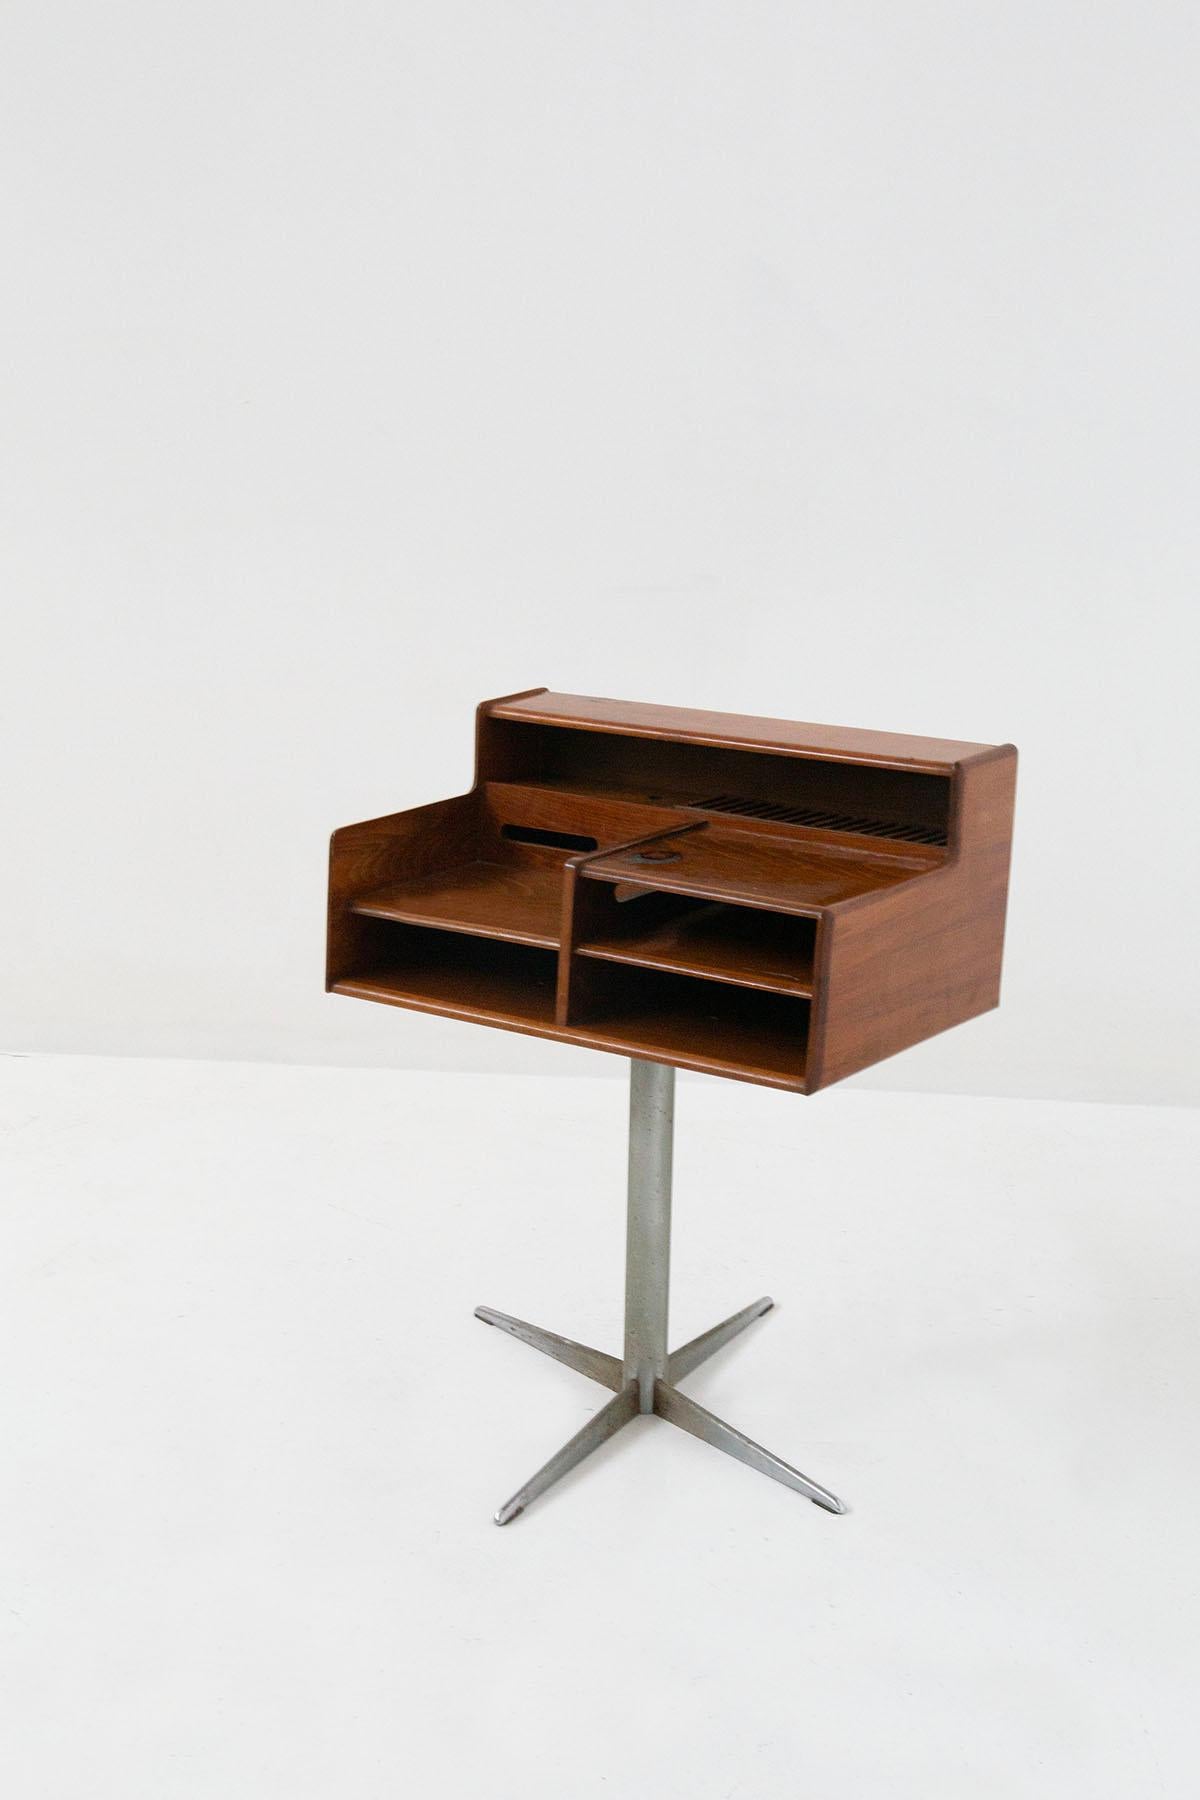 Small Italian desk made by Fimsa Roma in wood and metal from the 1950s early 1960s. The small desk has several compartments to insert small objects as well. The desk is made of wood as a structure and has three document shelves, and towards the